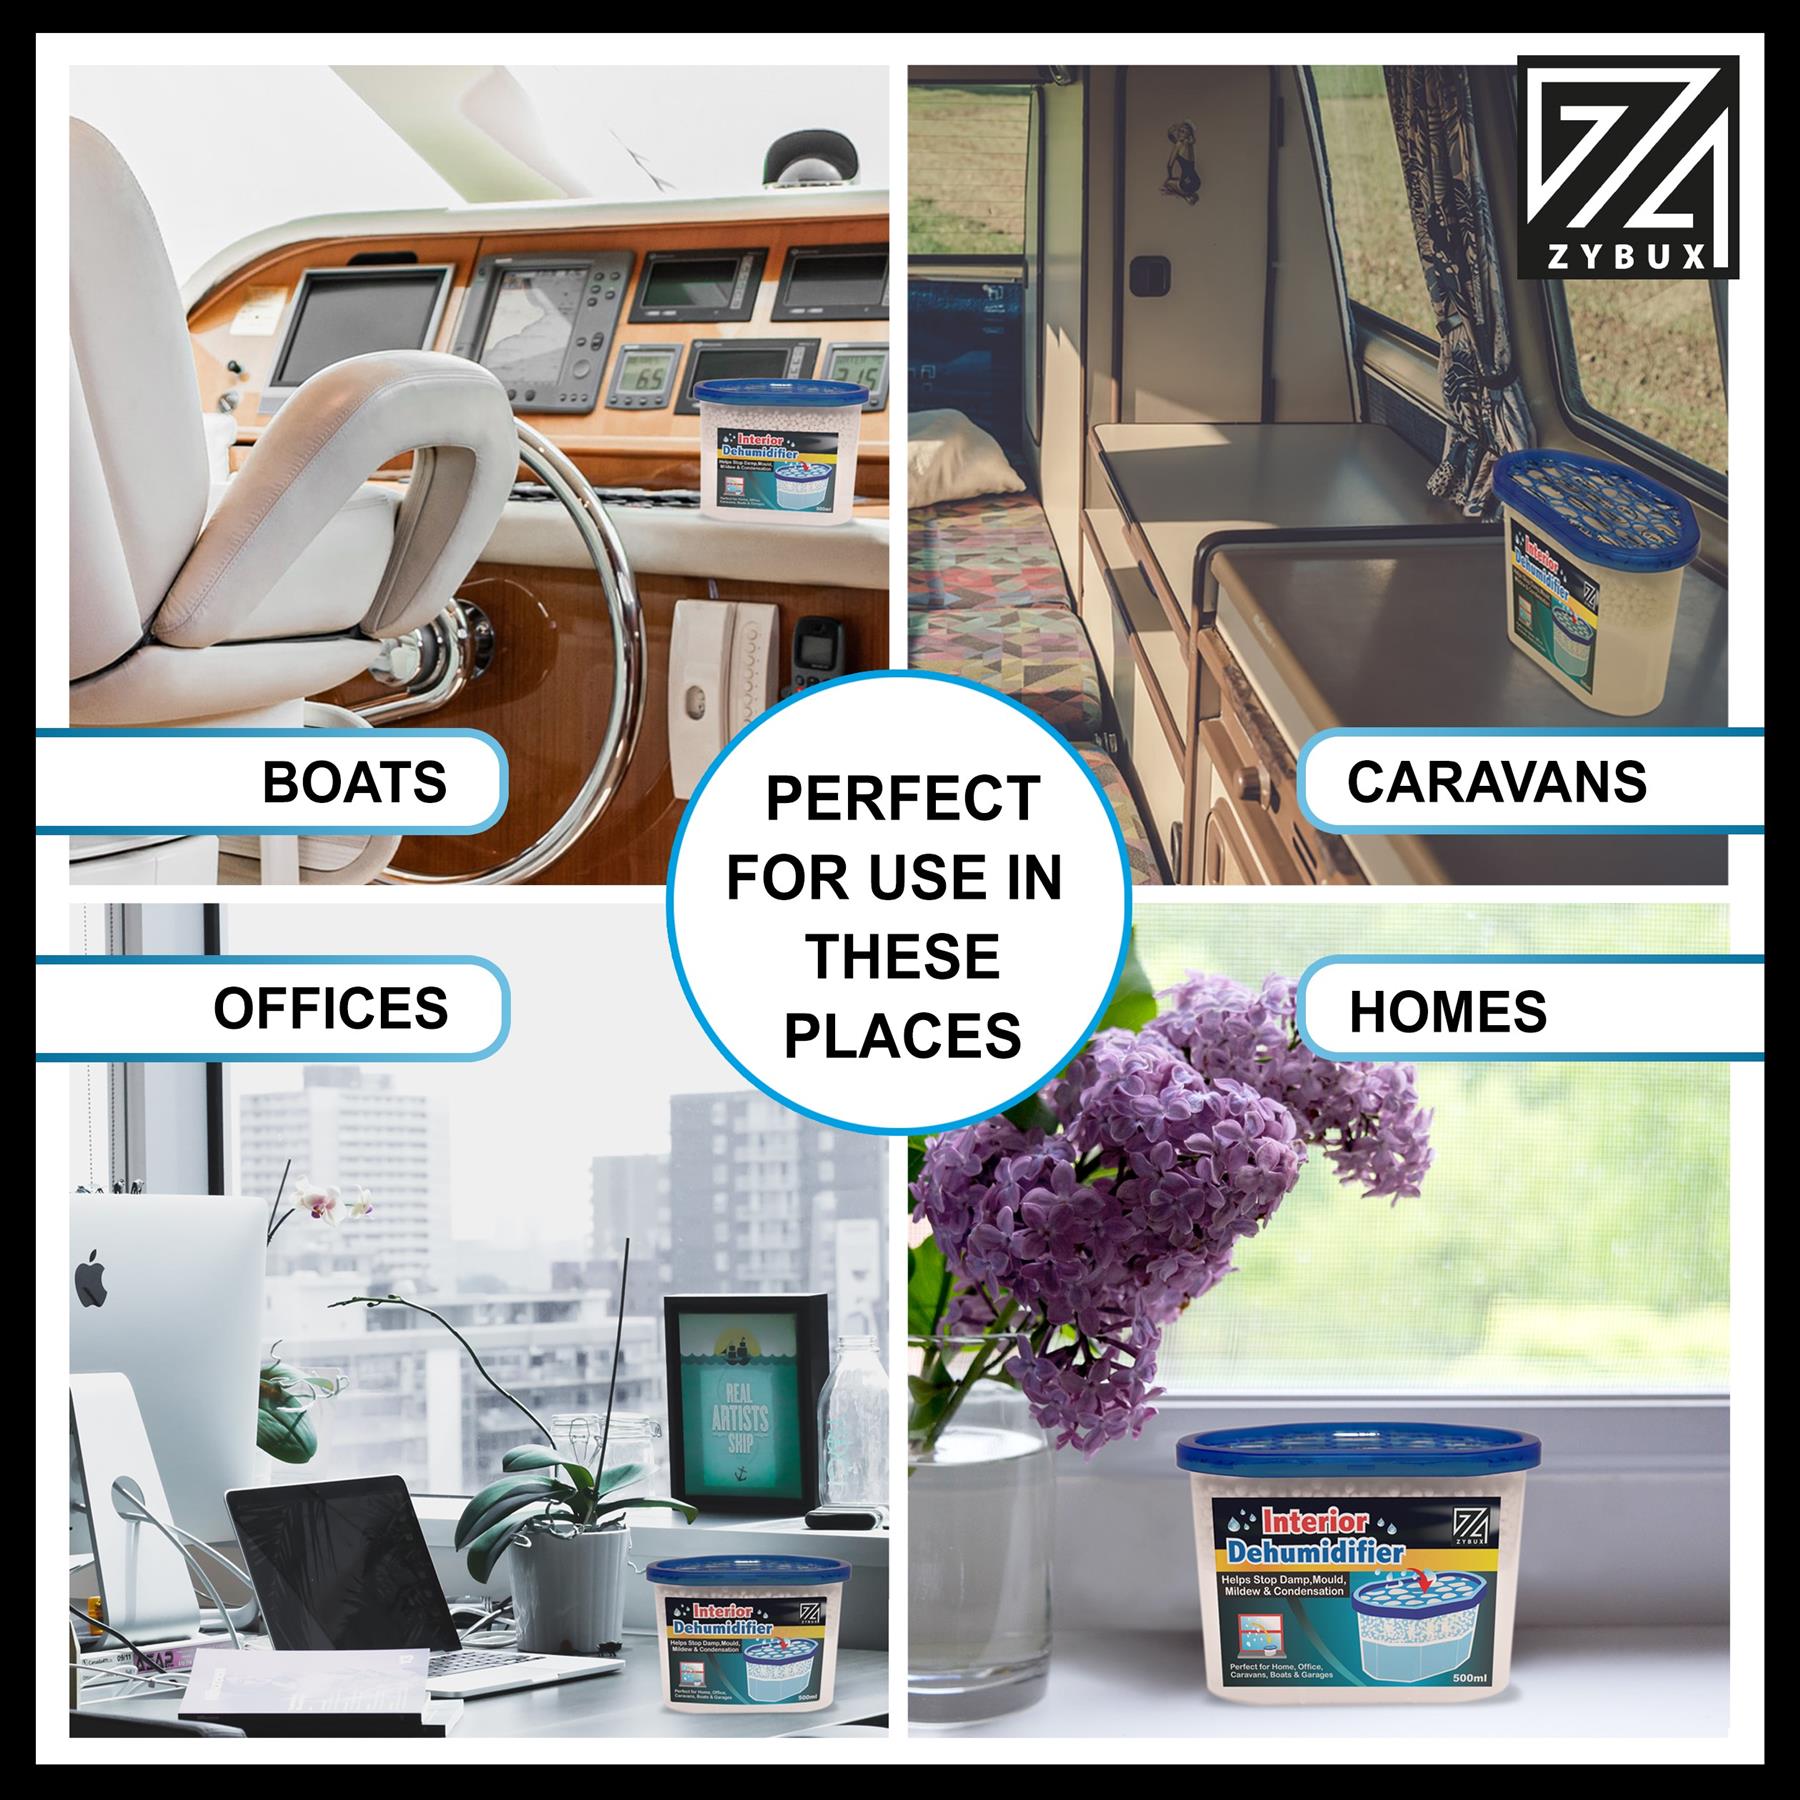 ZYBUX - 5 x Interior Dehumidifier 500ml - for Effective Reduction of Condensation, Mildew and Damp from cupboards, wardrobes, bathrooms, caravans, Boats and Vehicles. - ZYBUX